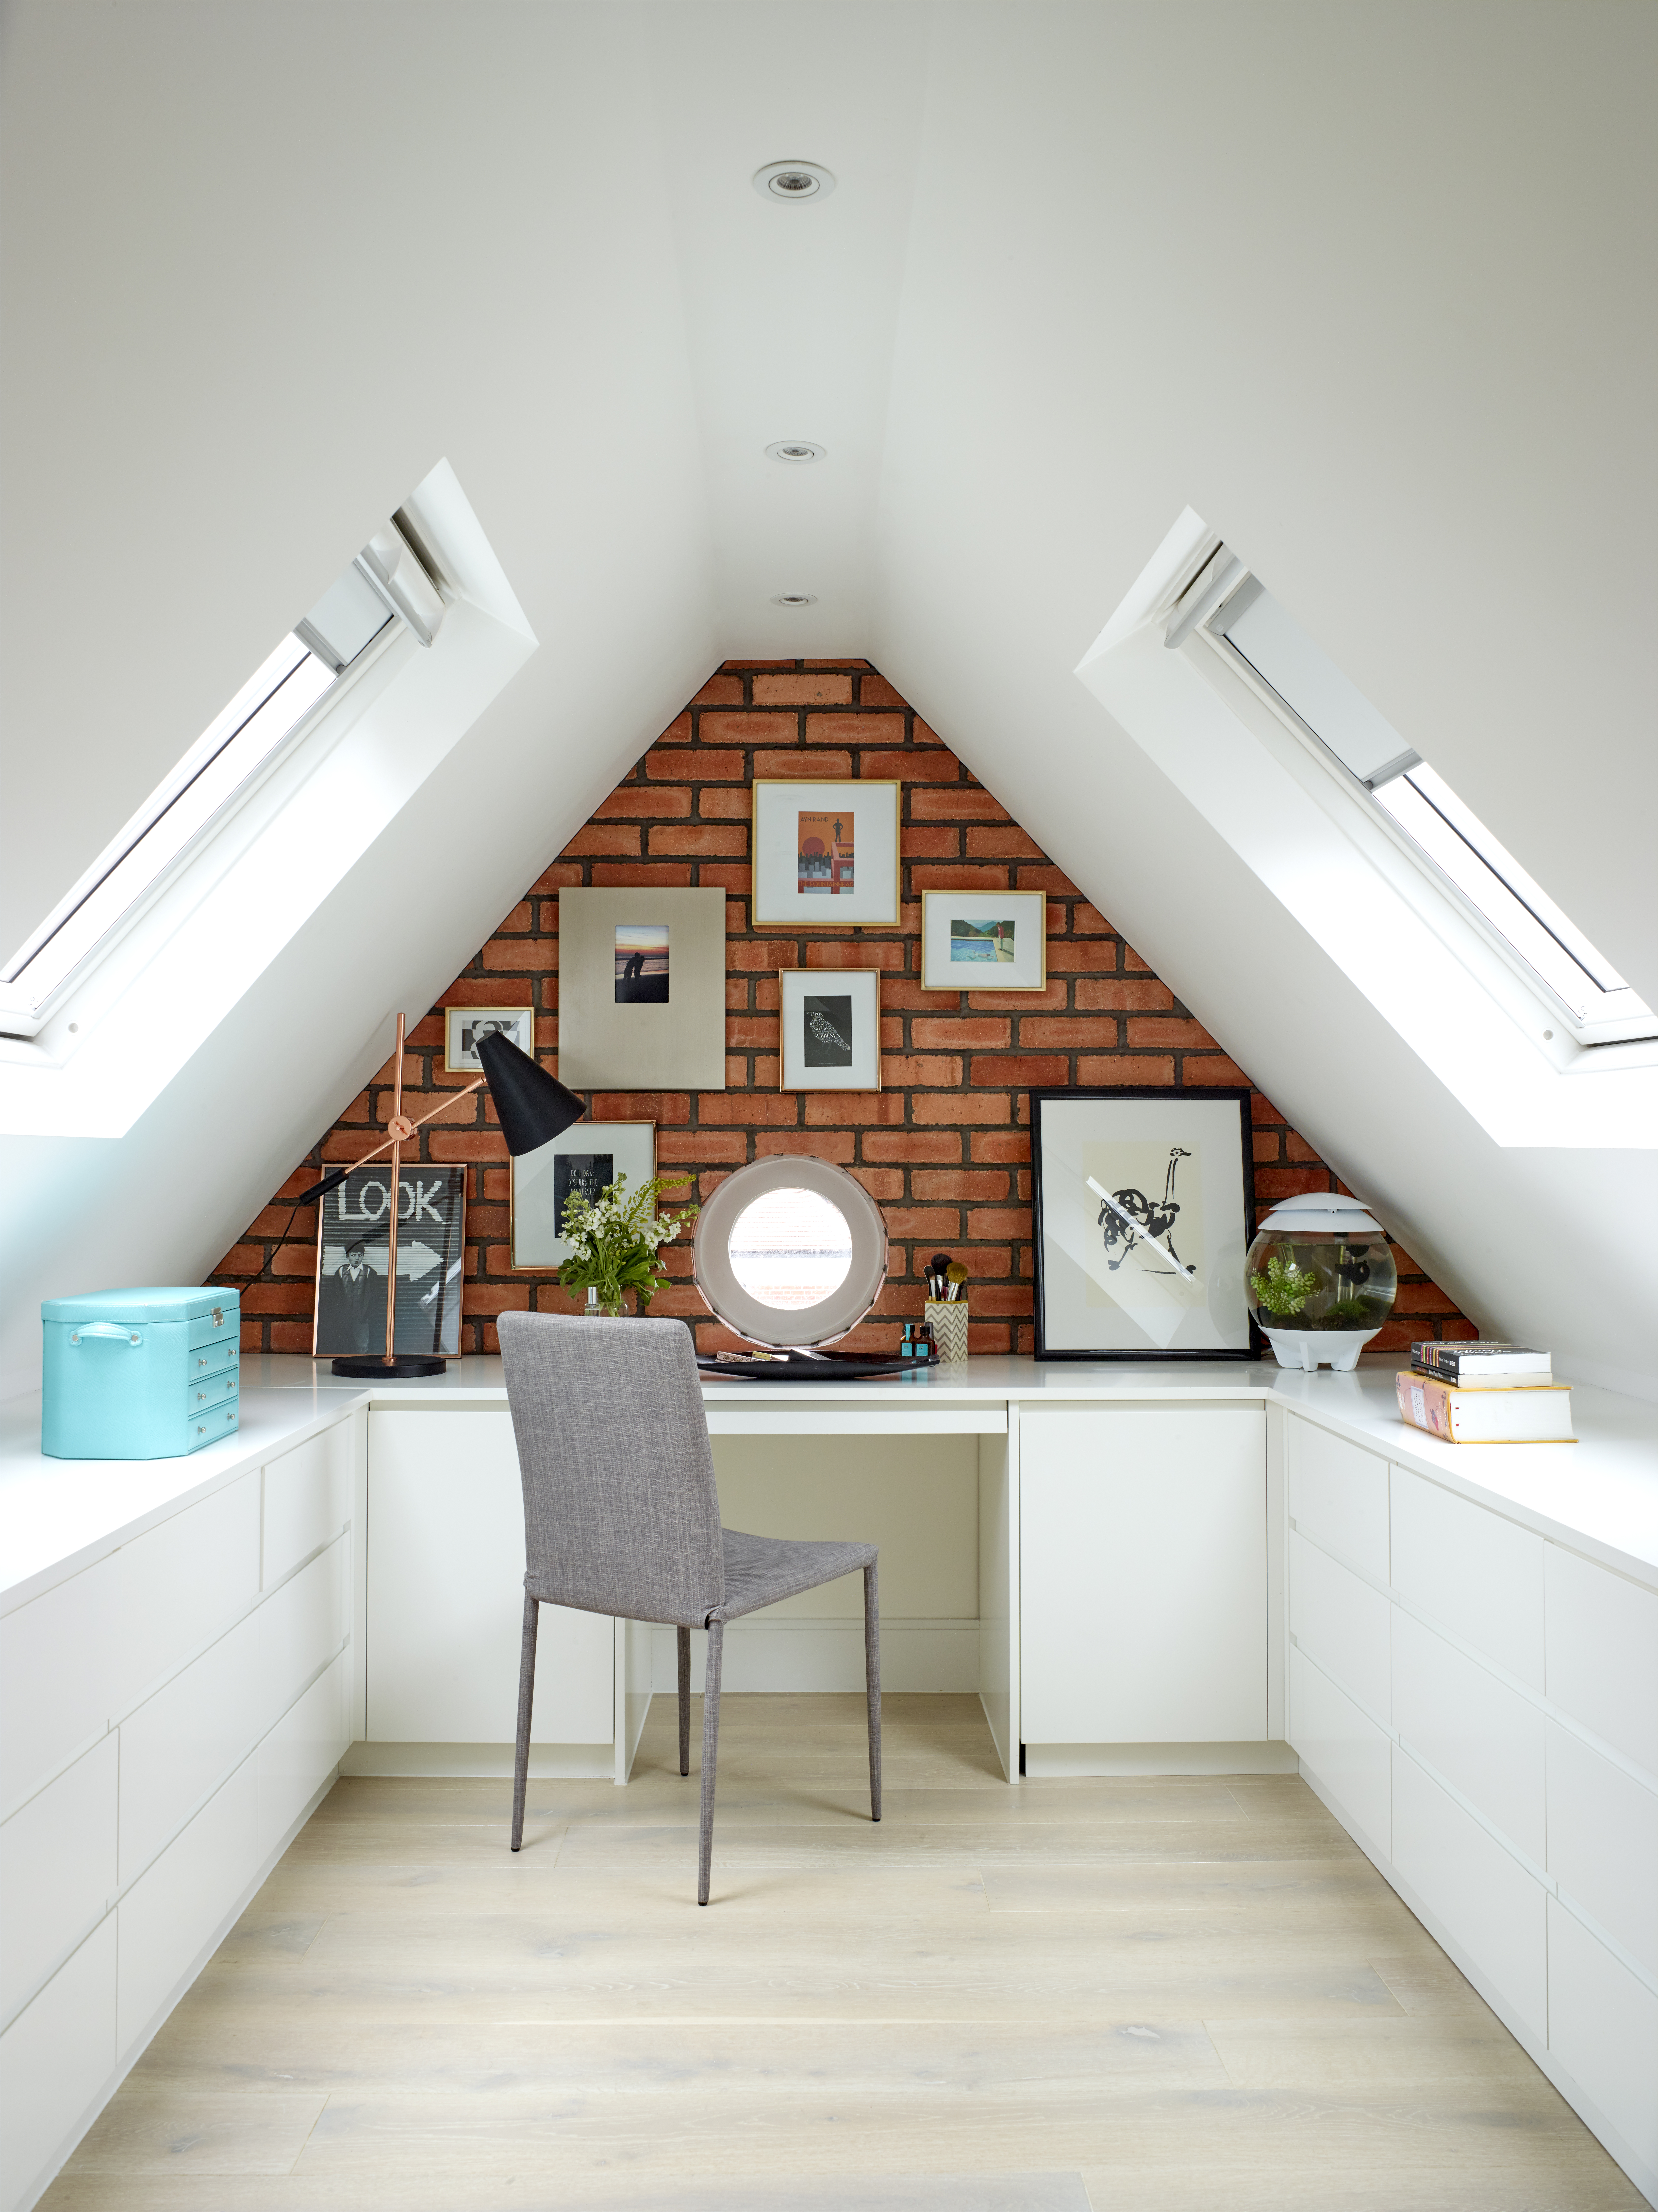 Home office in a loft conversion, West Hampstead